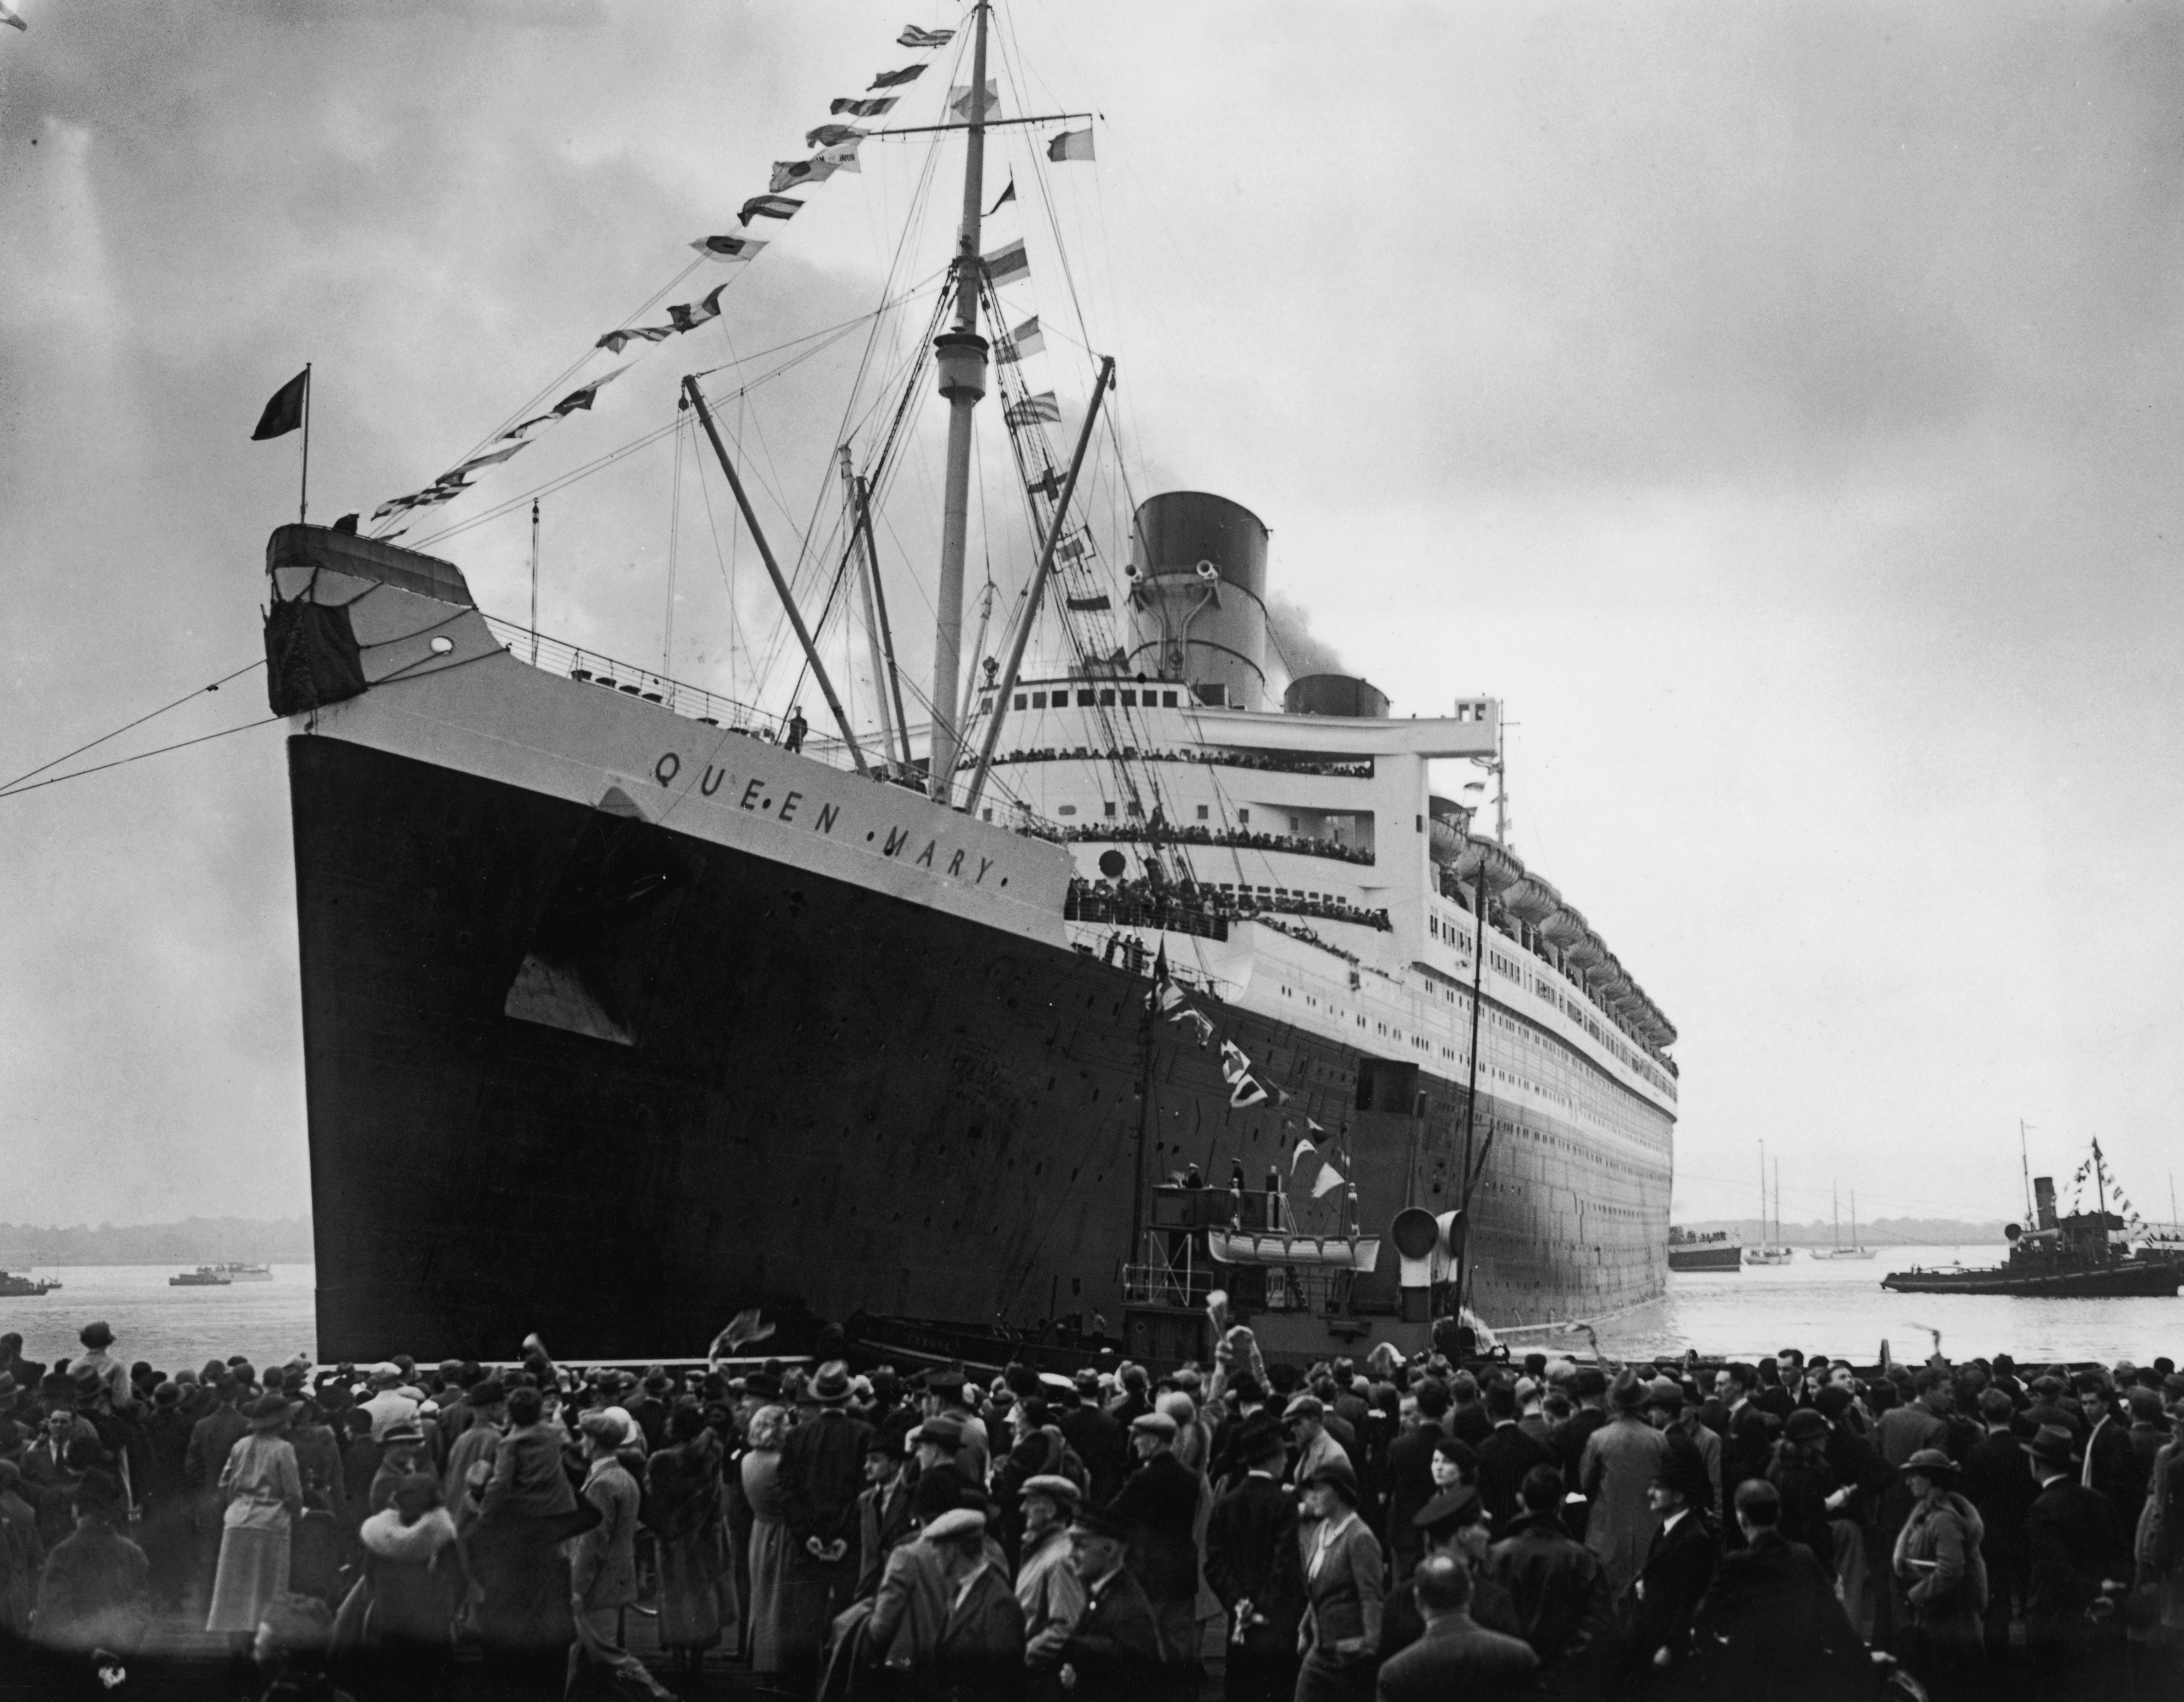 The Queen Mary, Getty Images